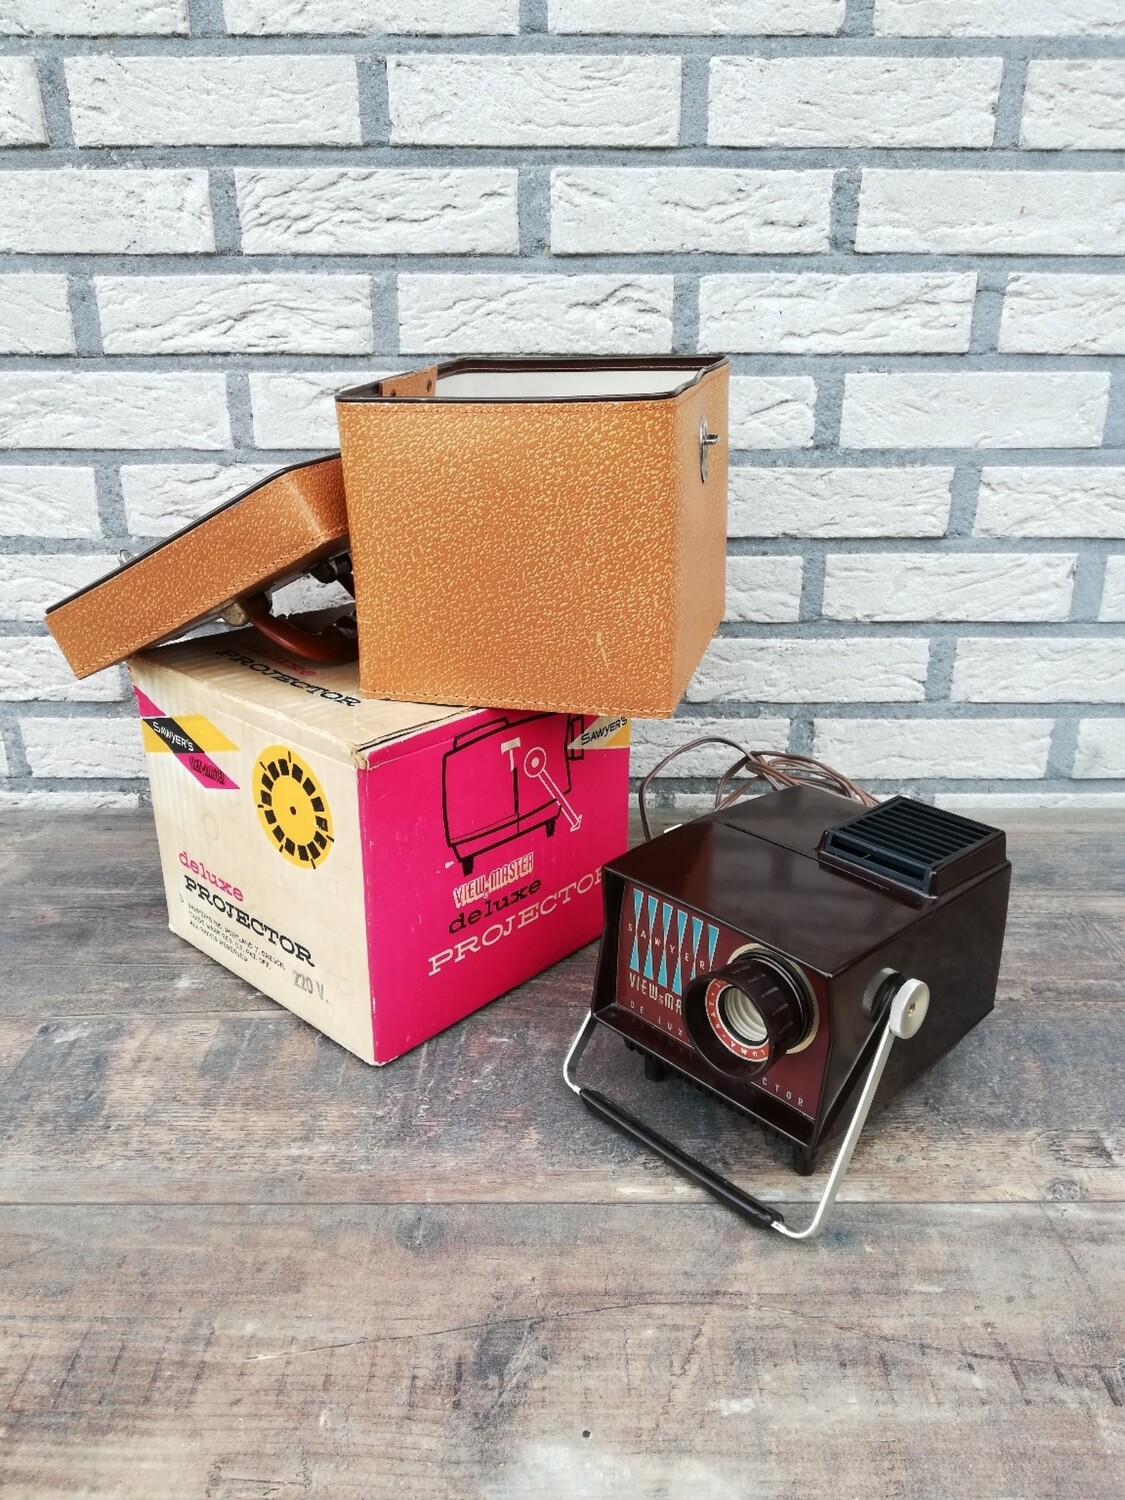 View-Master deluxe projector